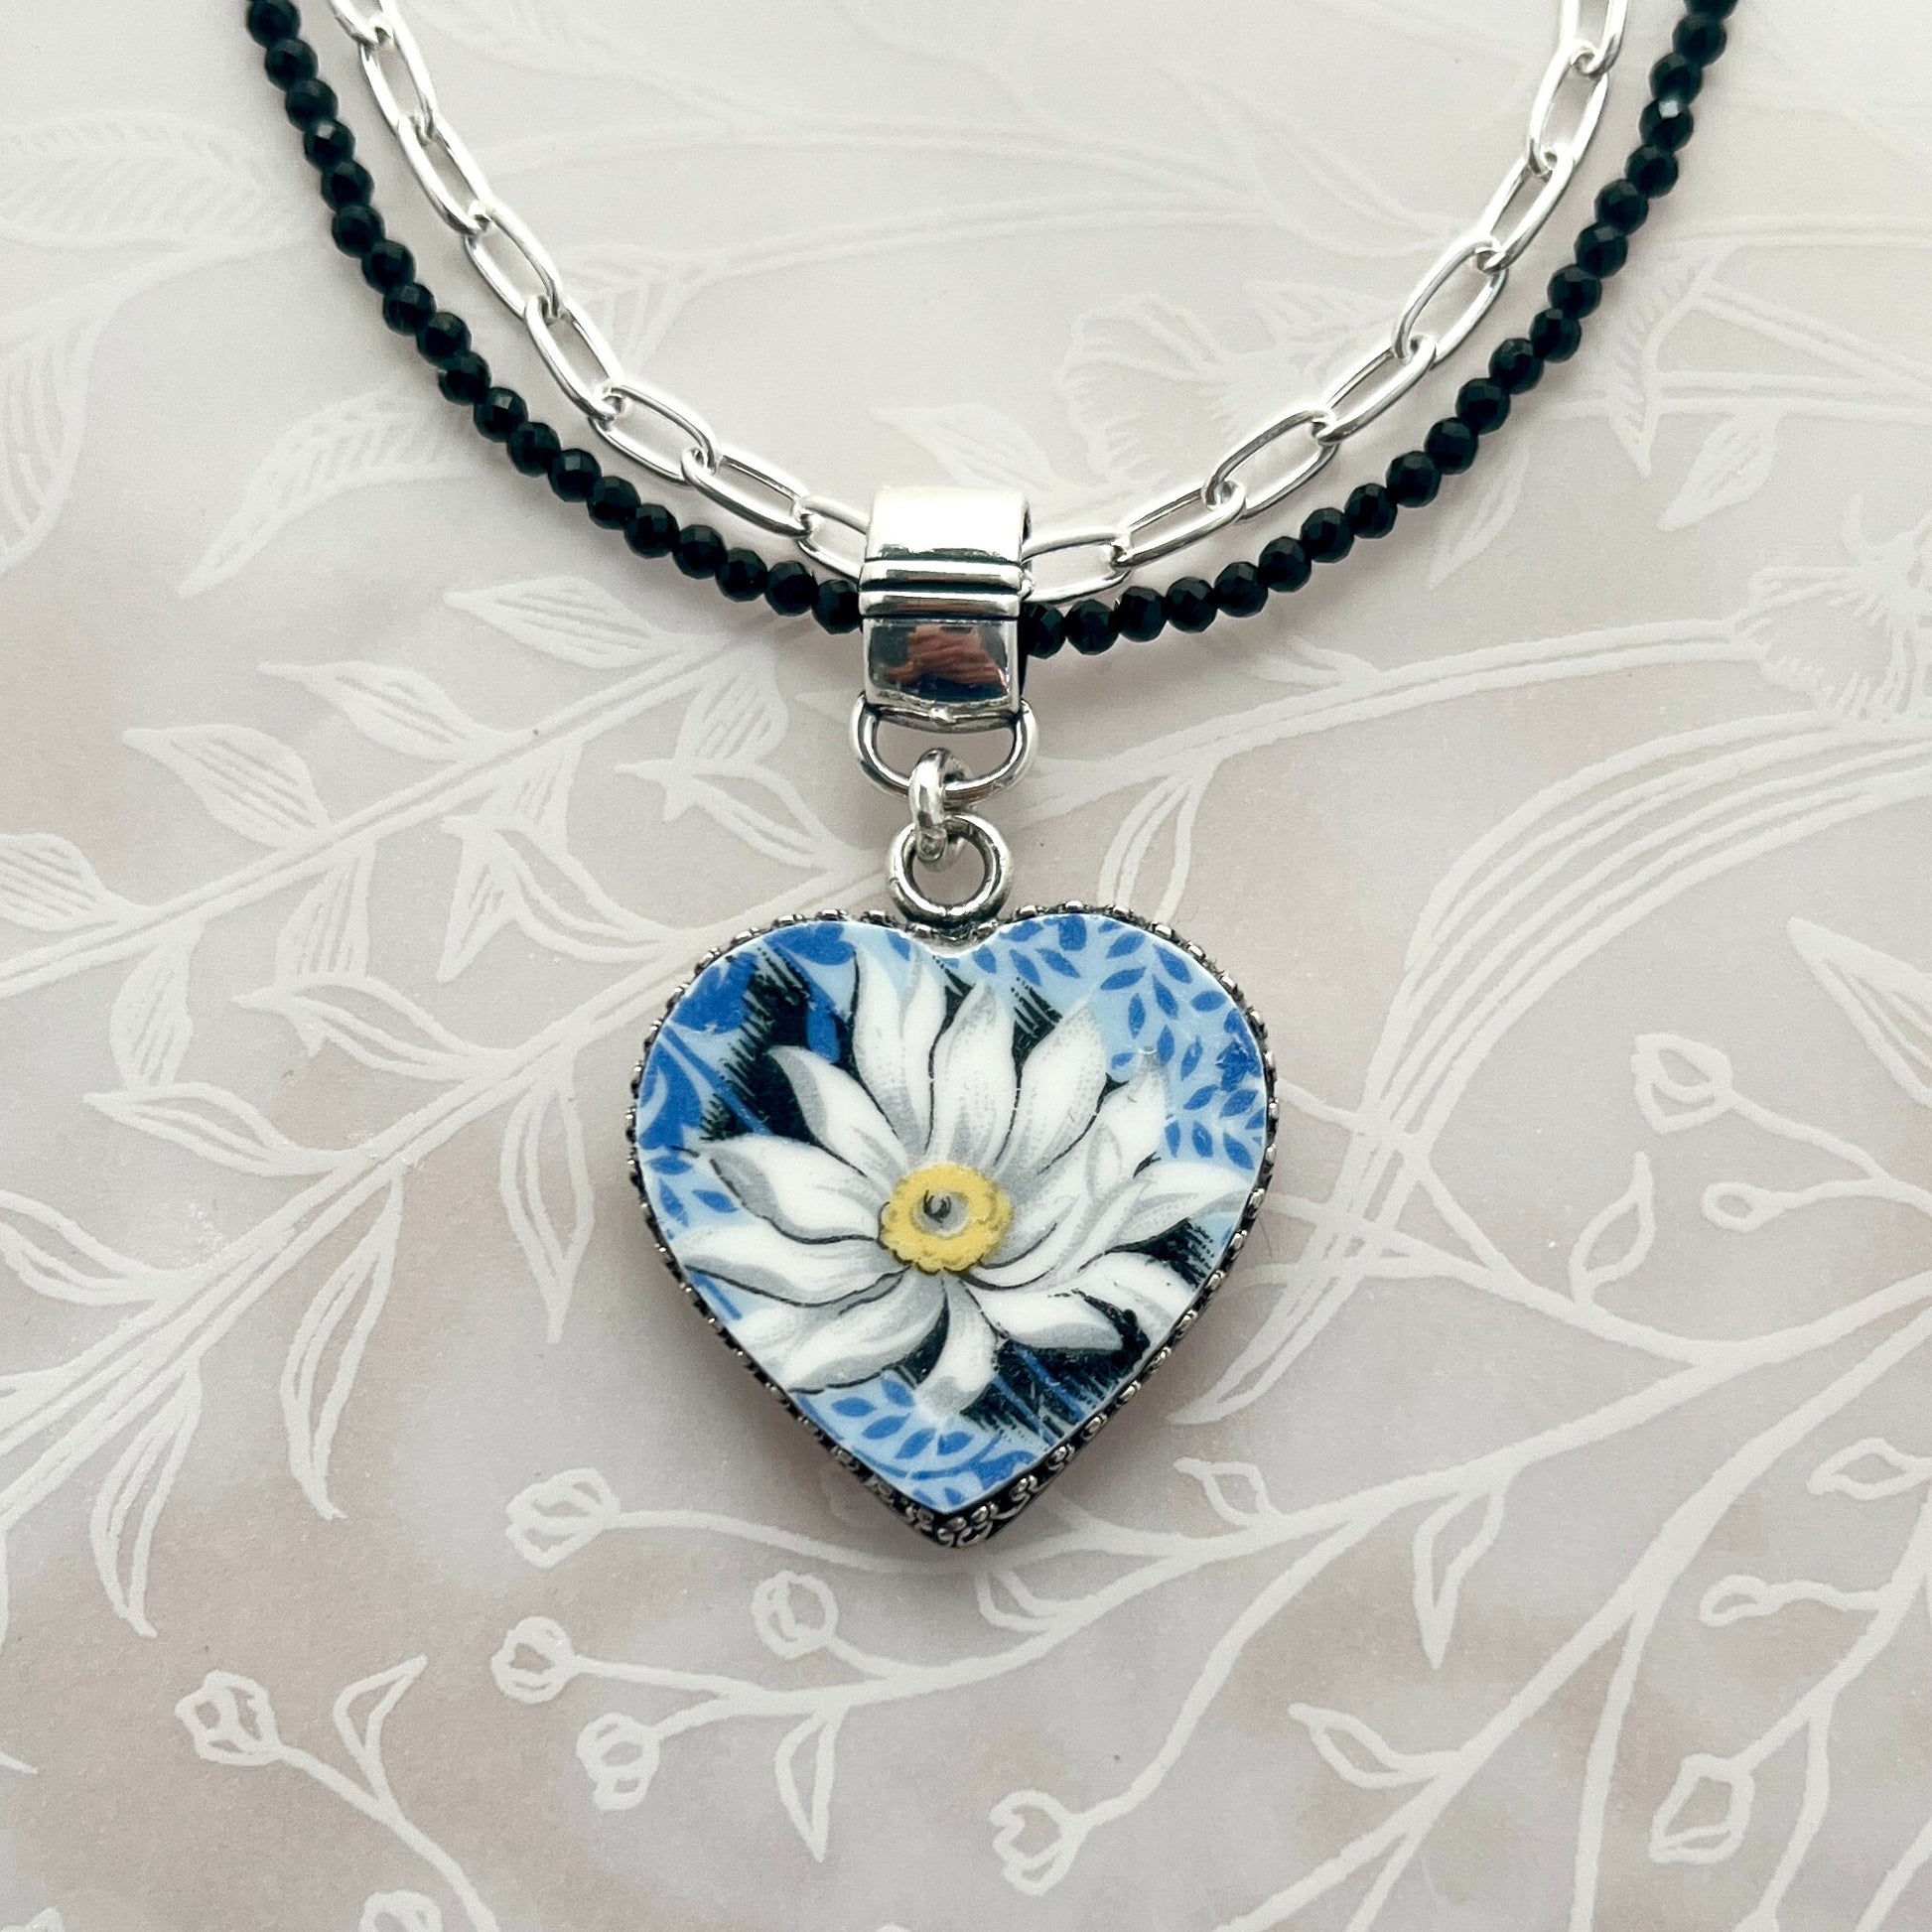 Daisy Broken China Jewelry, 20th Anniversary Gift for Wife, Romantic Heart Necklace